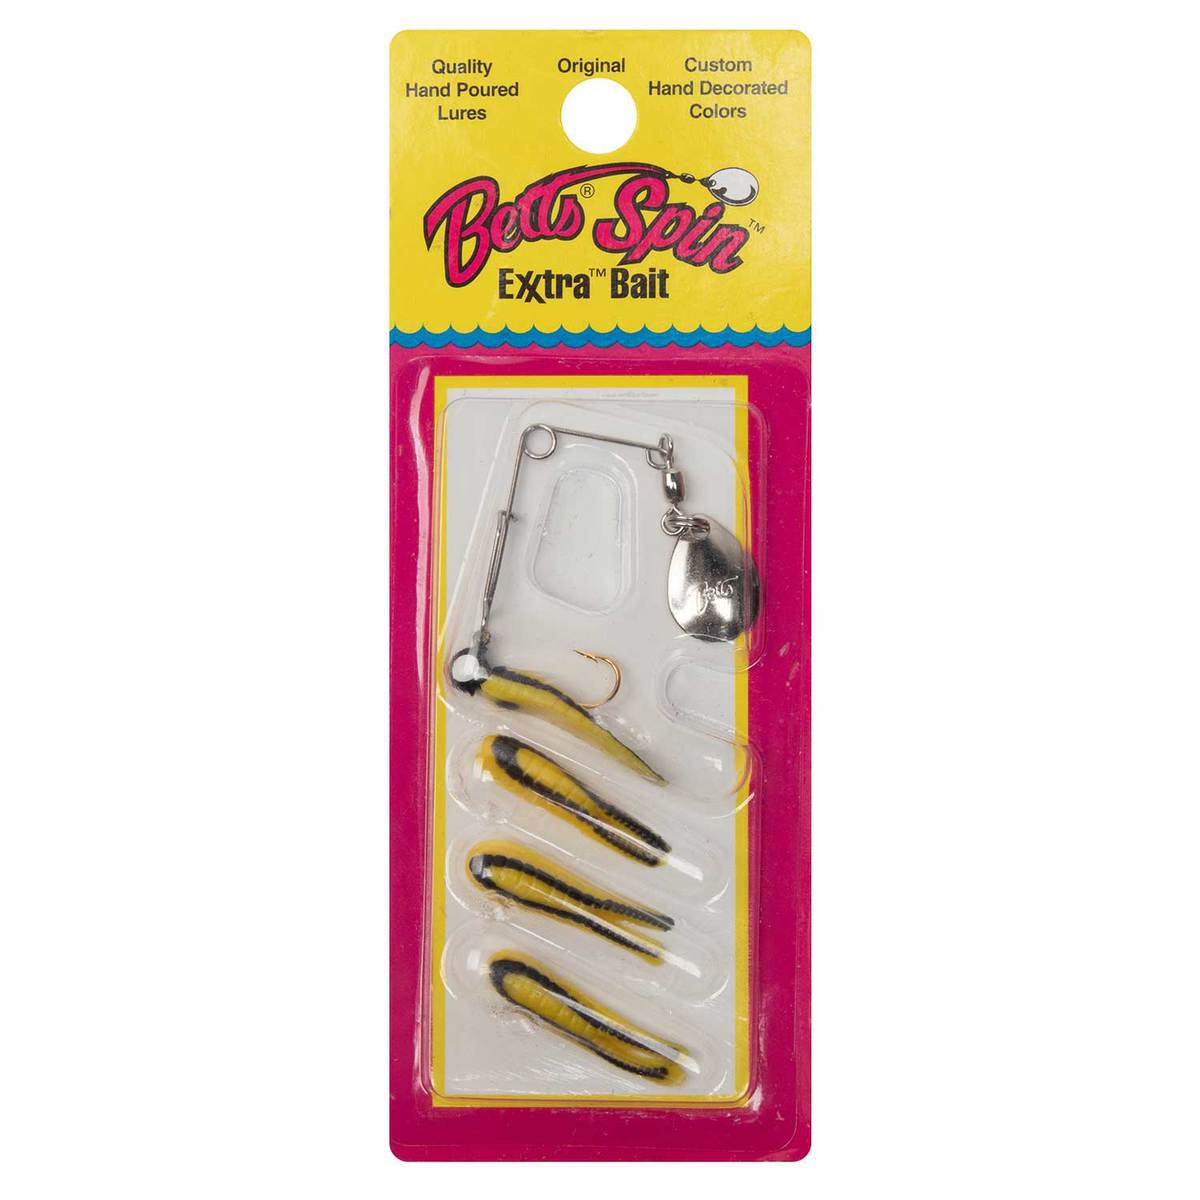 Betts 025ST-24N Spin Split Tail Lure 3/" 1//4 oz Black And Yellow